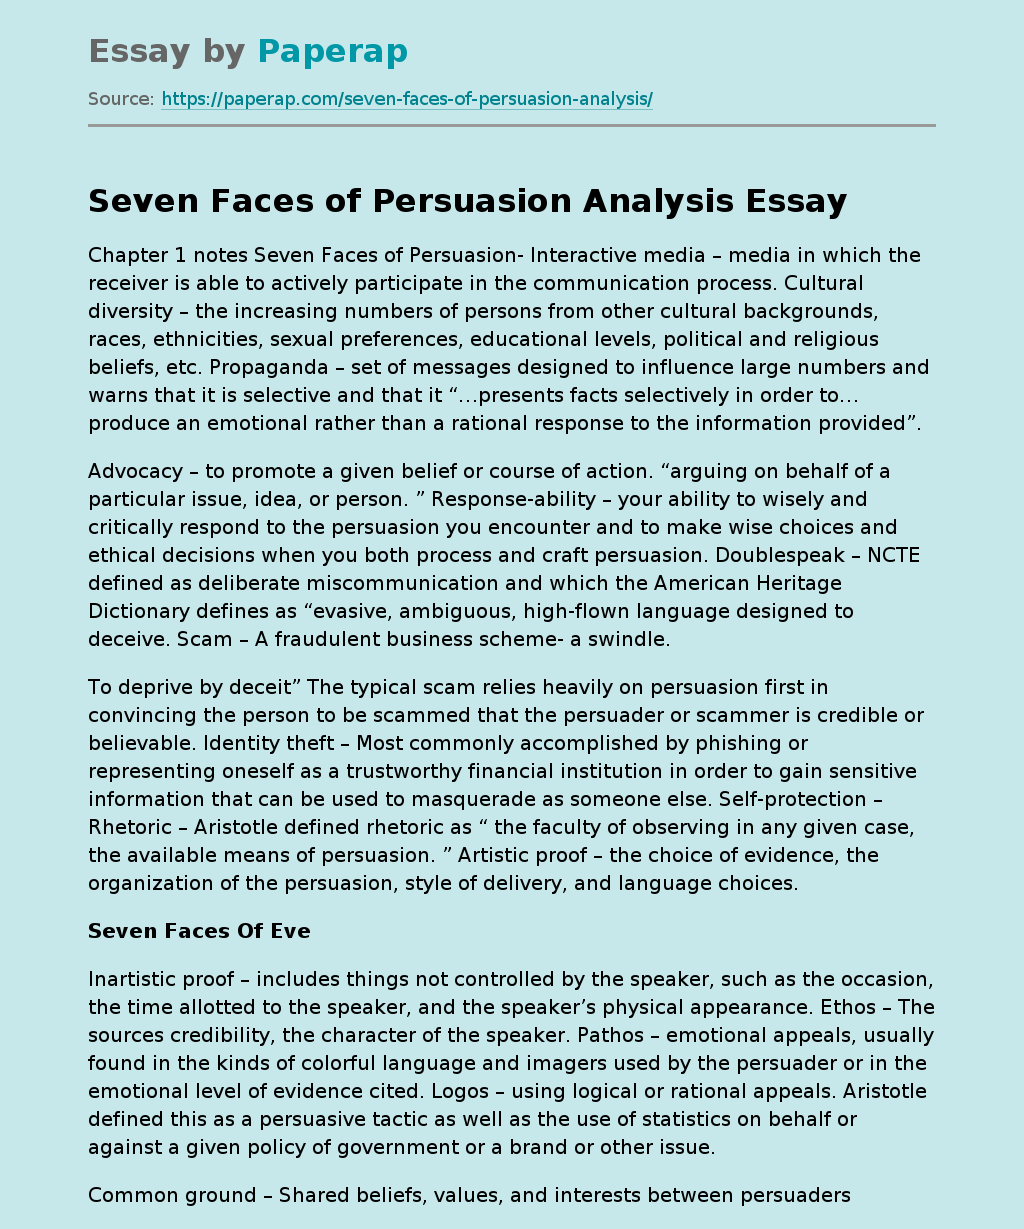 Seven Faces of Persuasion Analysis